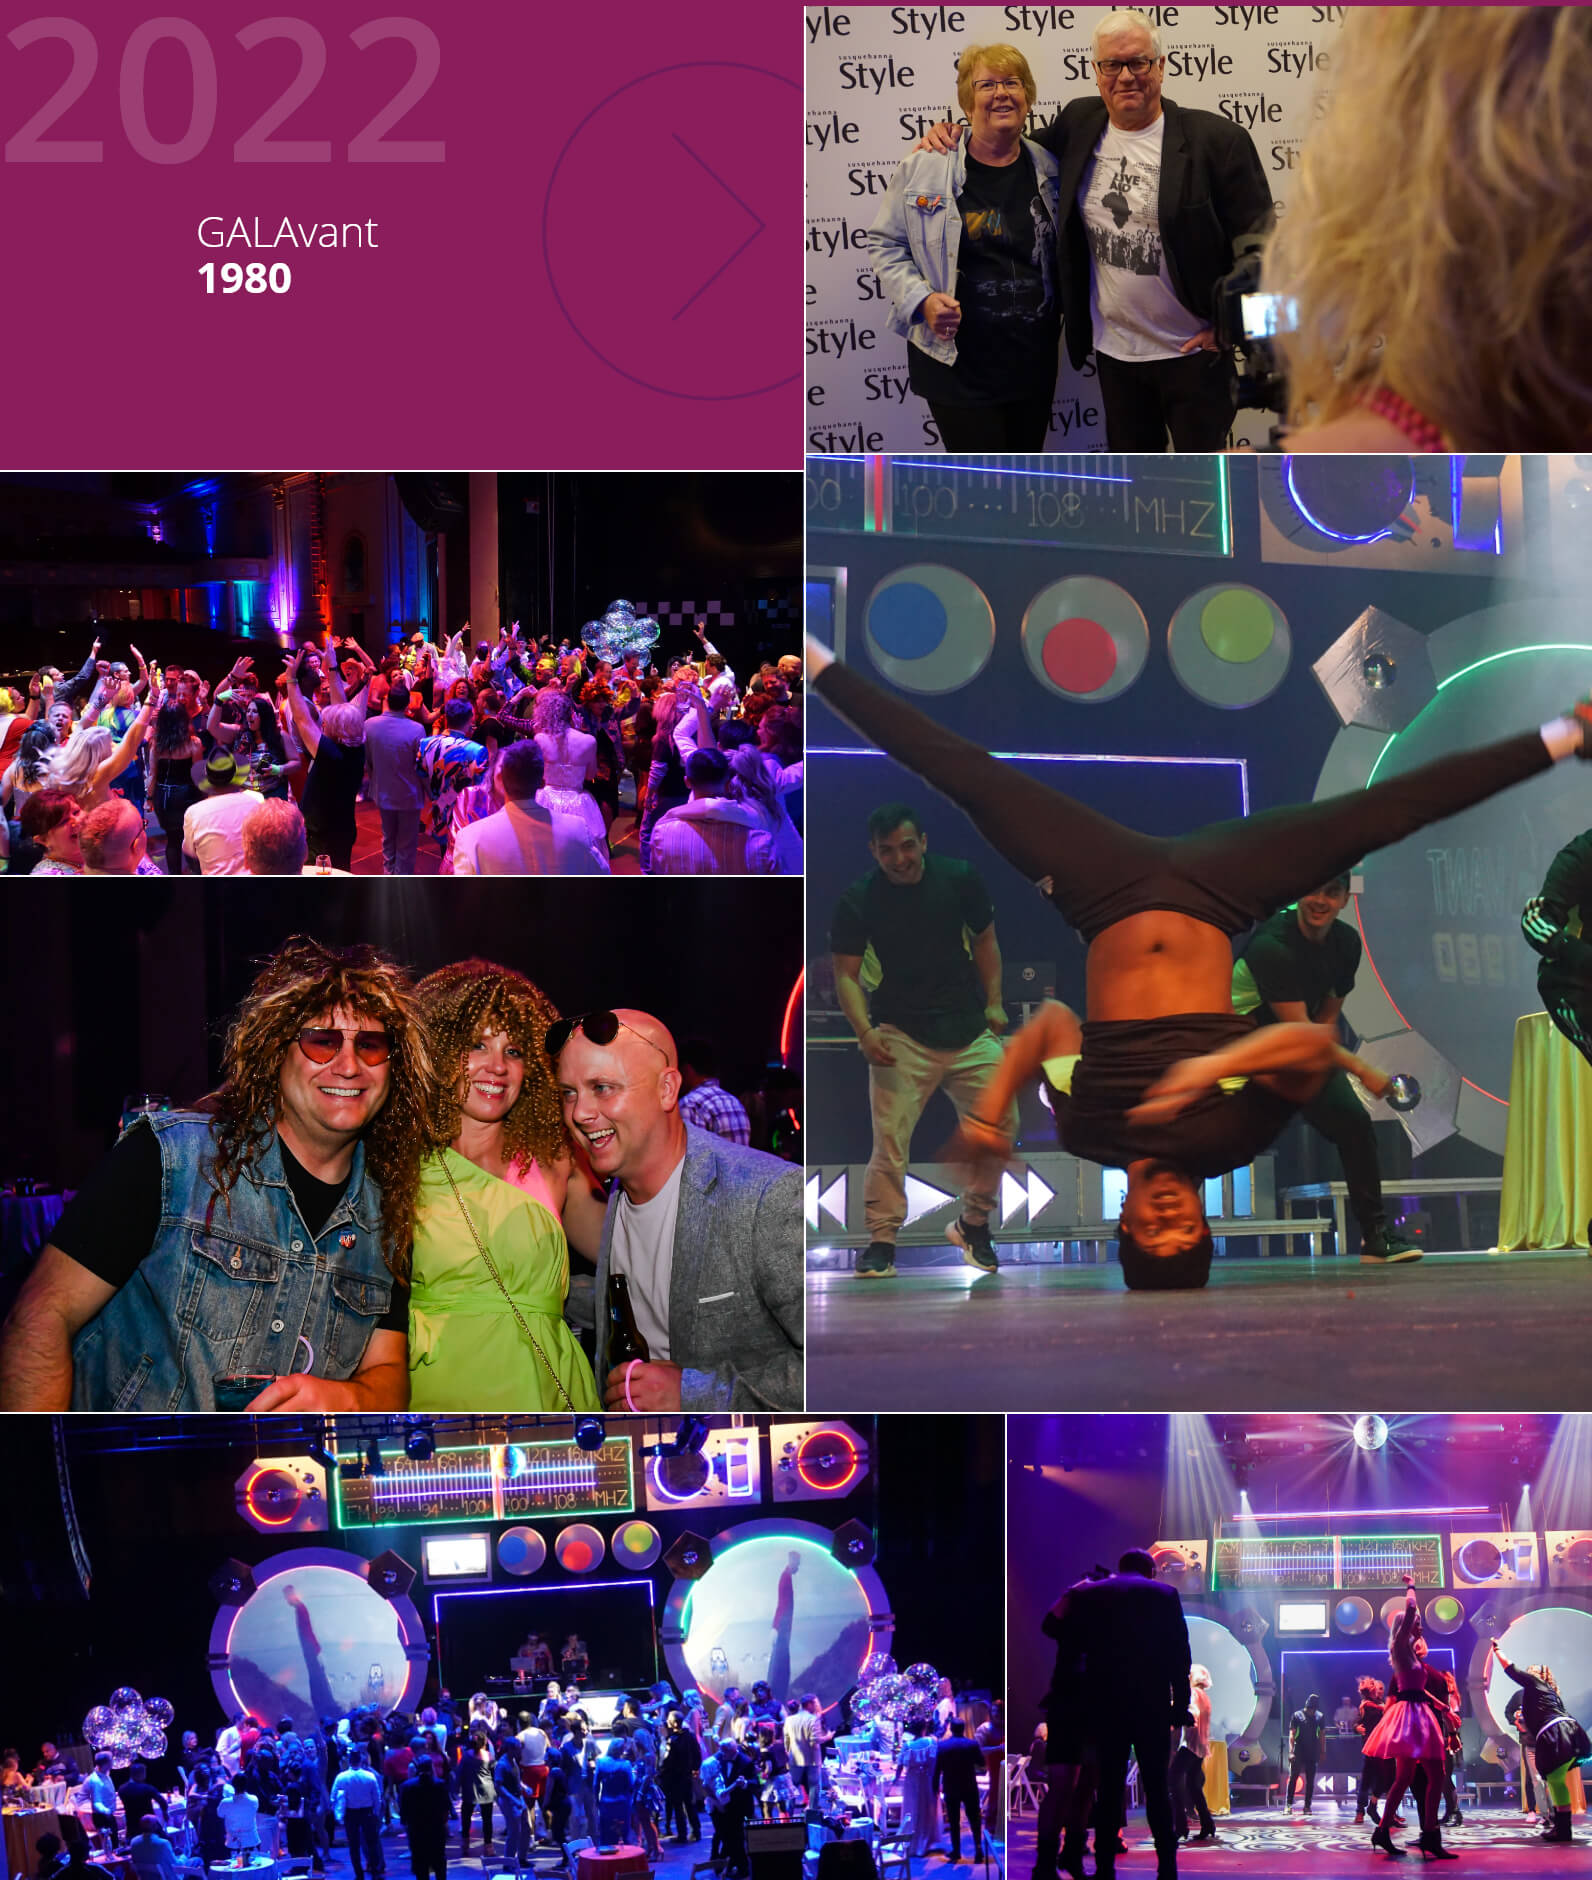 Images of GALAvant 1980, an 80s themed gala held in 2022.